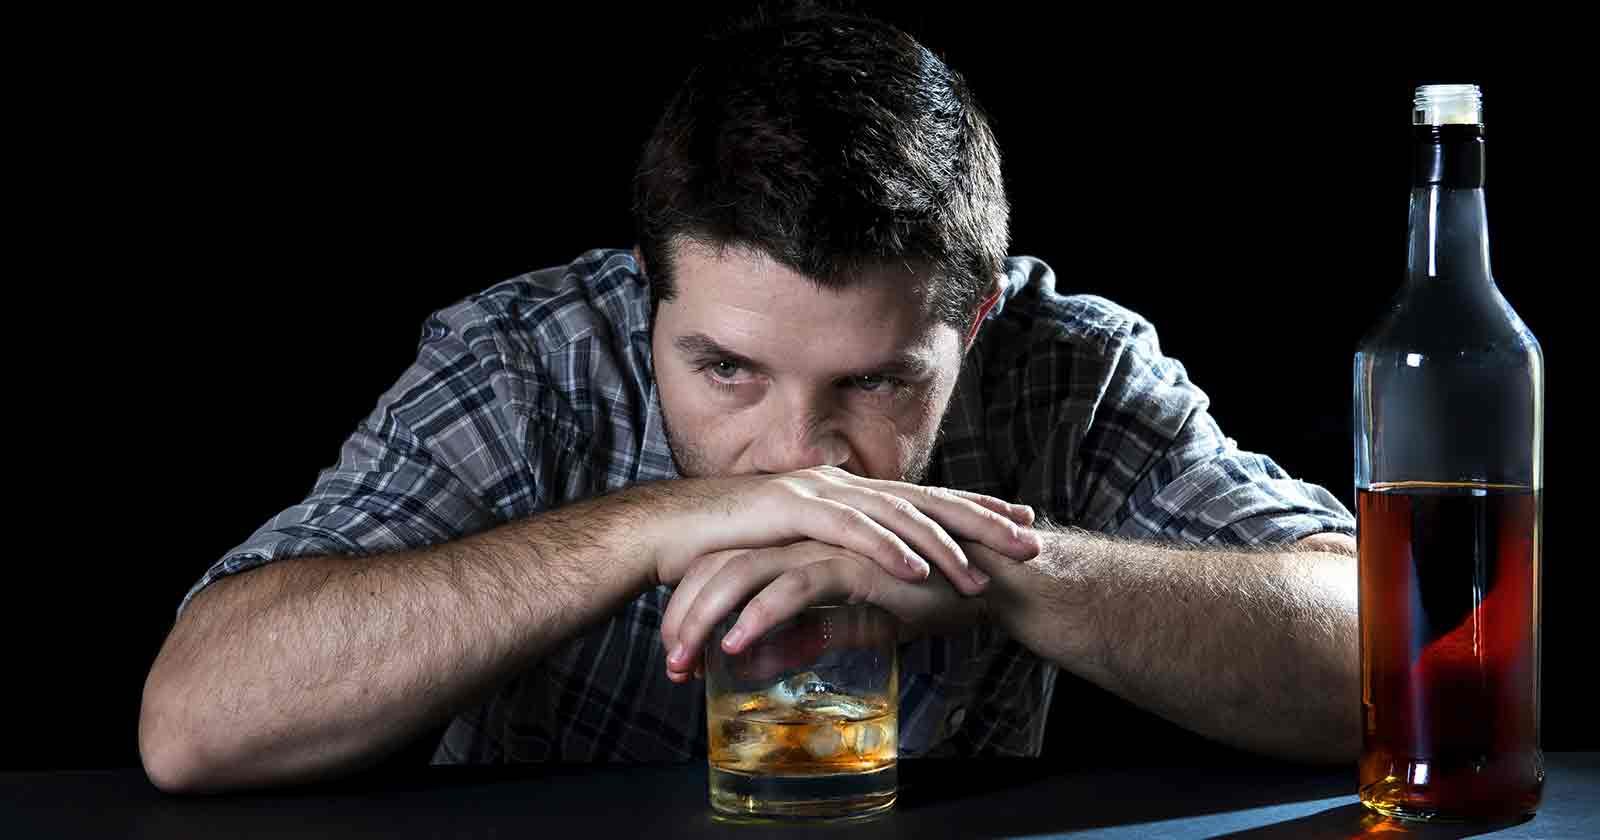 don't ignore signs of alcohol use disorder